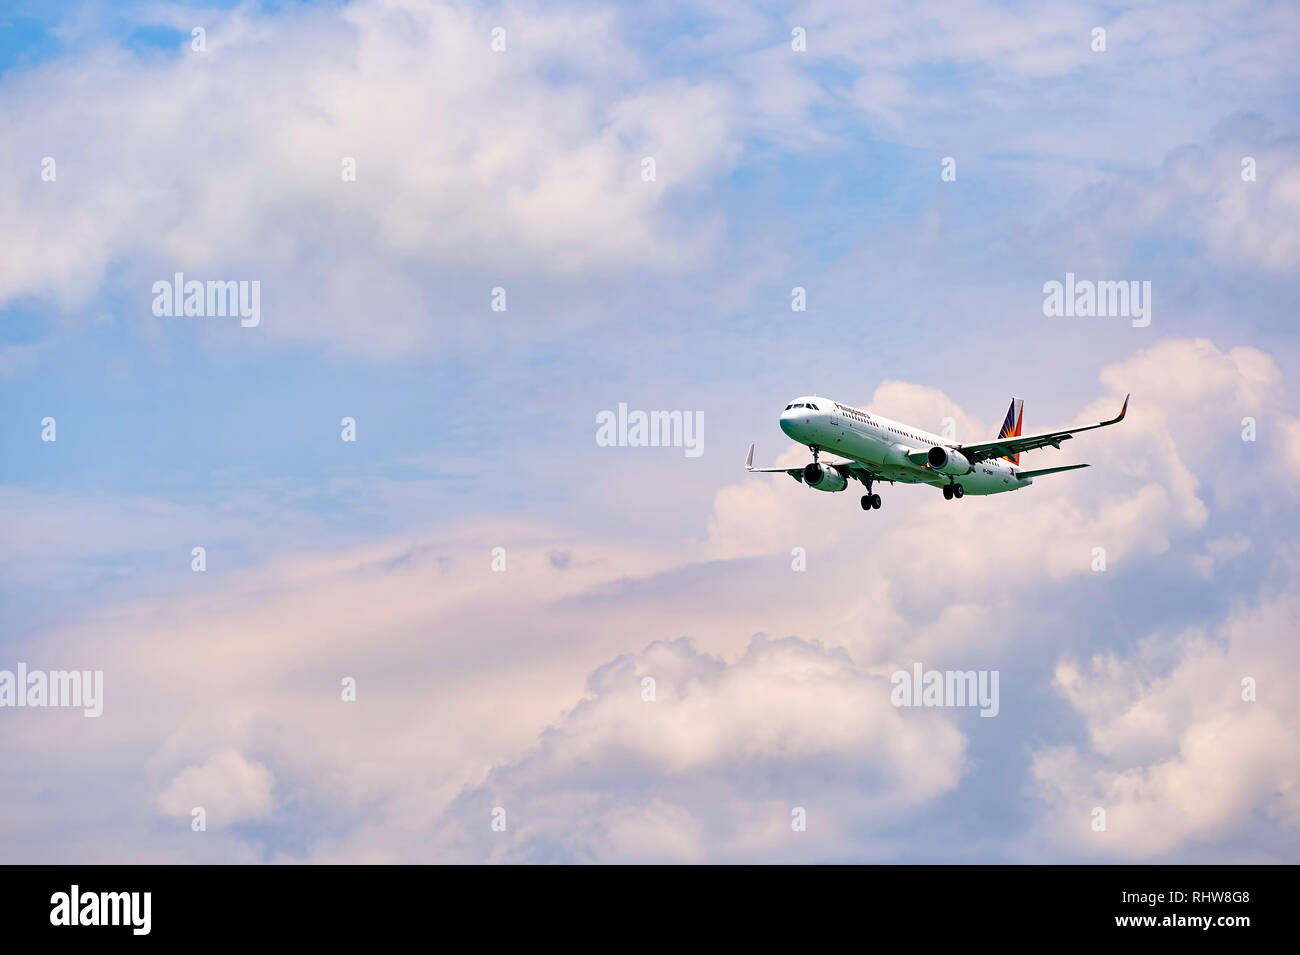 HONG KONG - JUNE 04, 2015: Philippine Airlines aircraft landing at Hong Kong airport. Philippine Airlines (PAL), a trade name of PAL Holdings, Inc. is Stock Photo